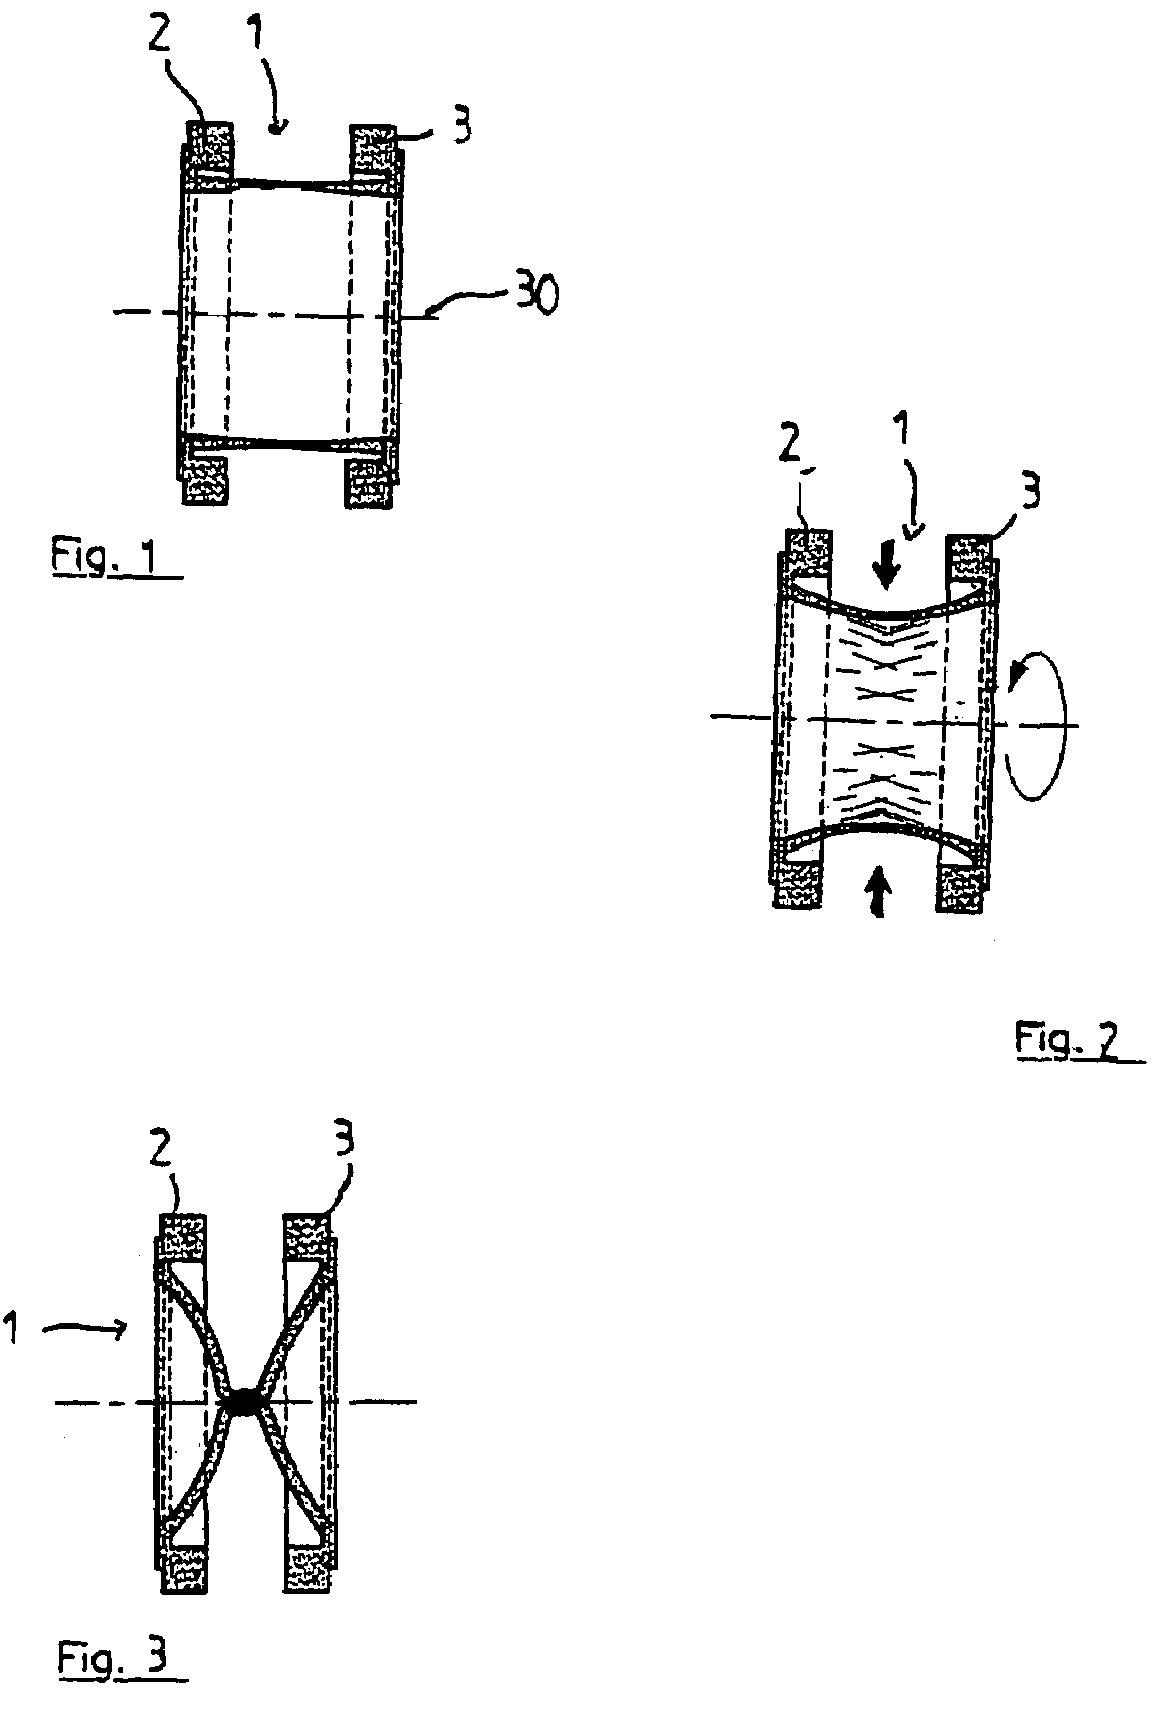 Valve for a surgical or medical instrument